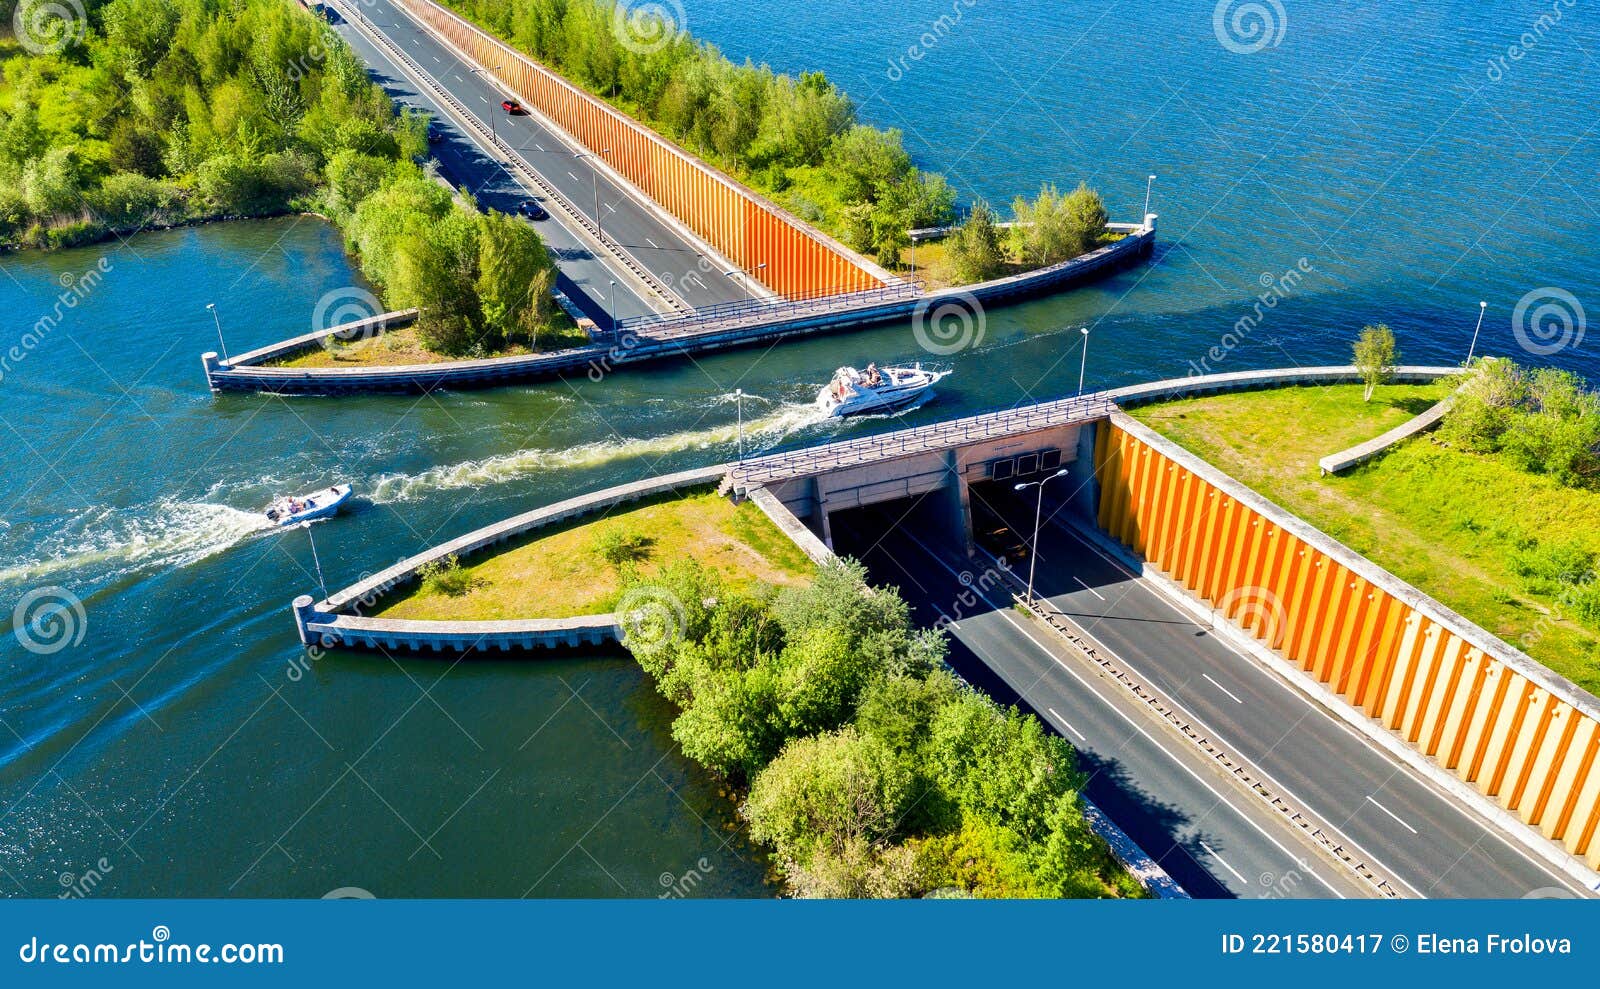 aquaduct veluwemeer, nederland. aerial view from the drone. a sailboat sails through the aqueduct on the lake above the highway